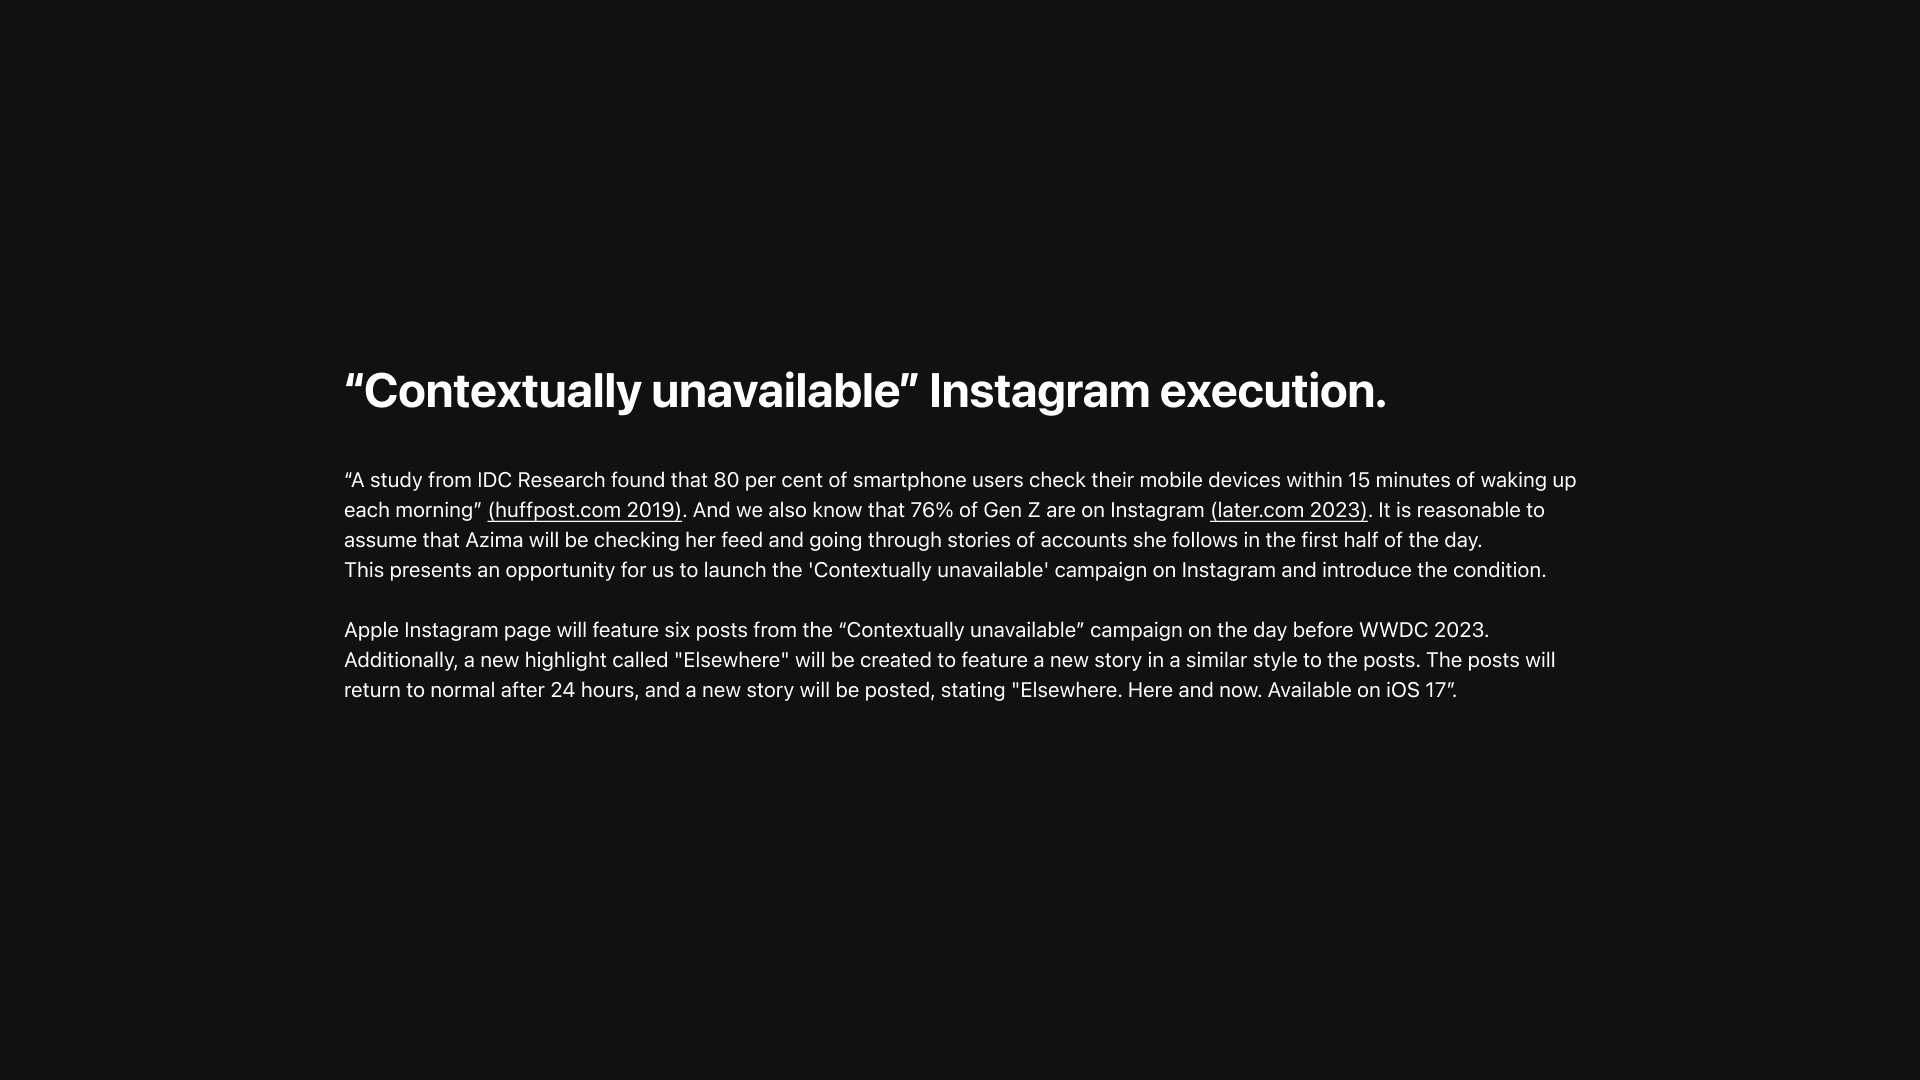 "Contextually unavailable" Instagram execution overview.